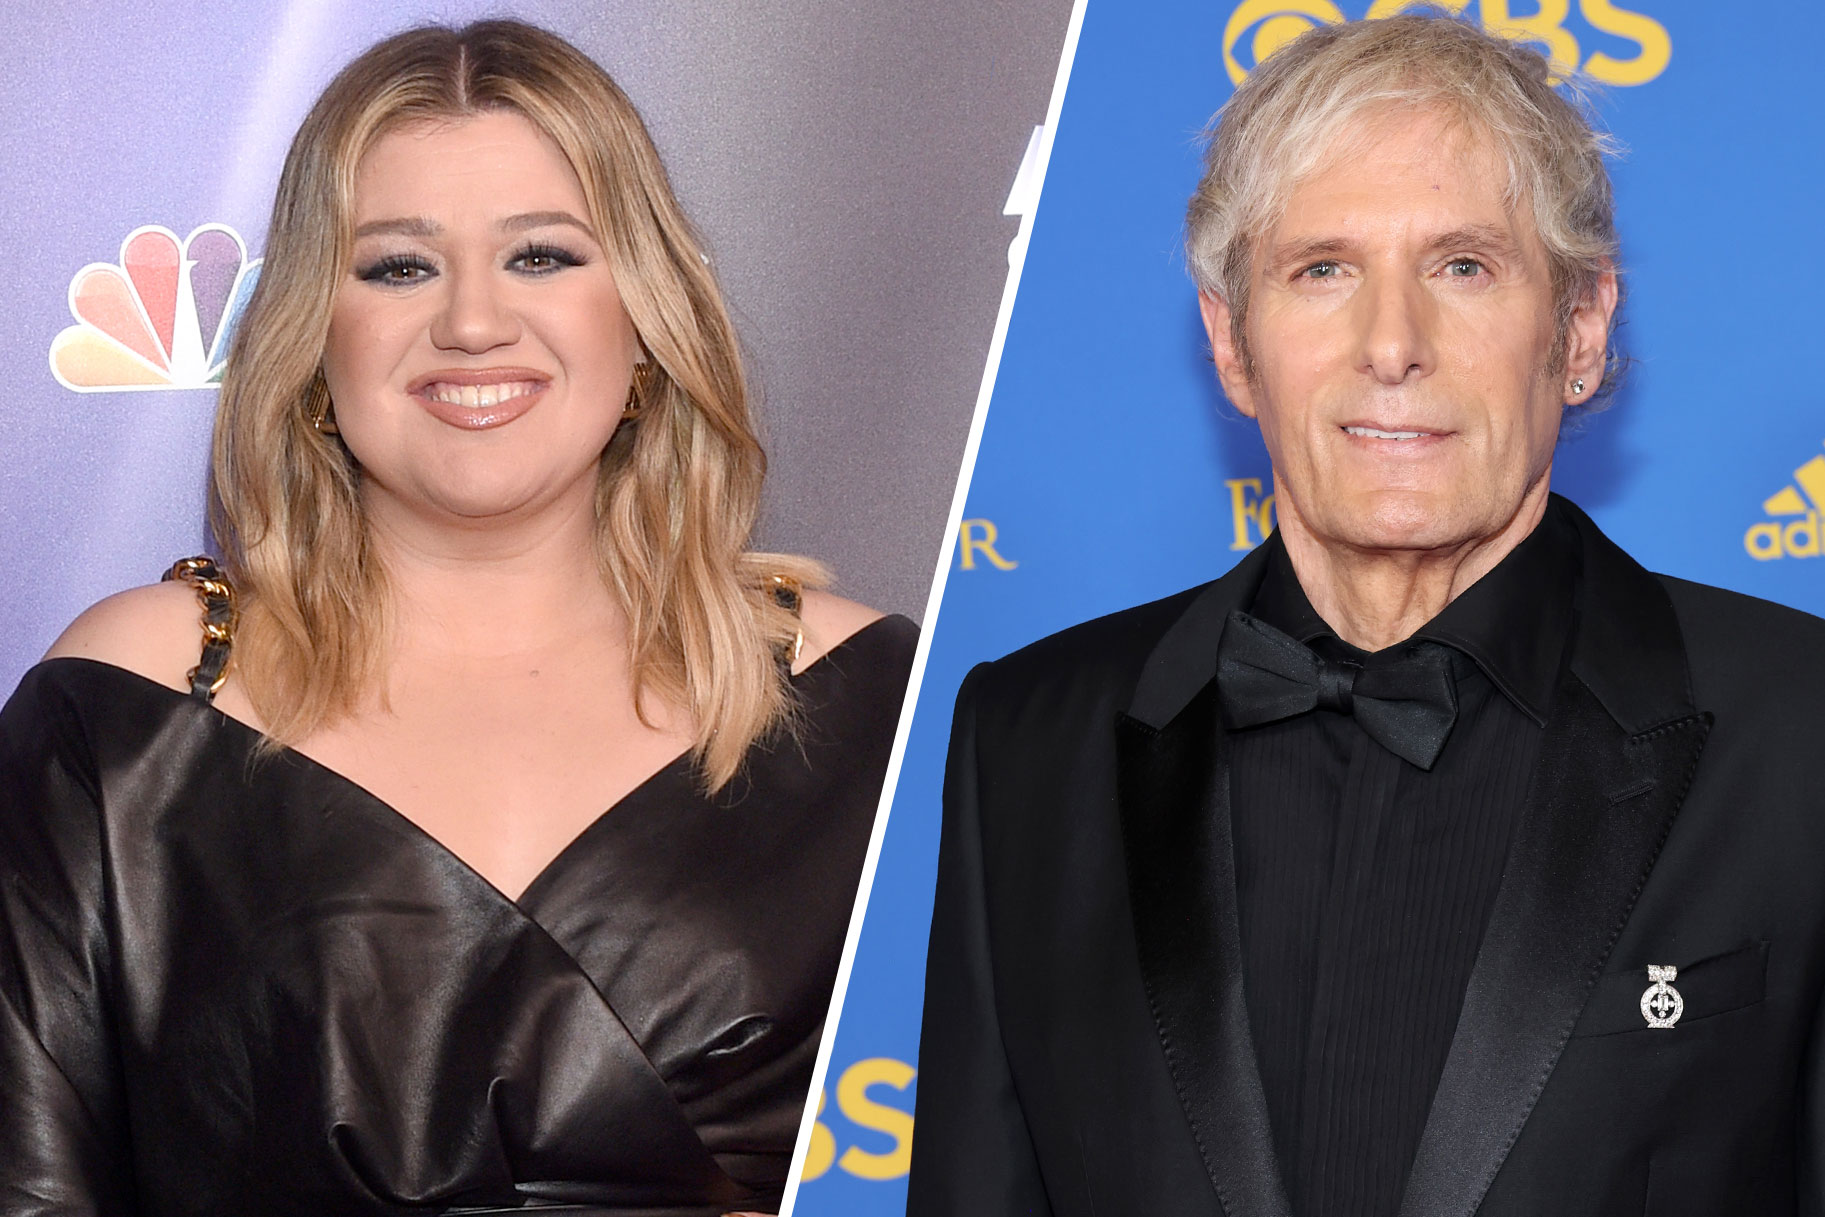 Kelly Clarkson and Michael Bolton perform together